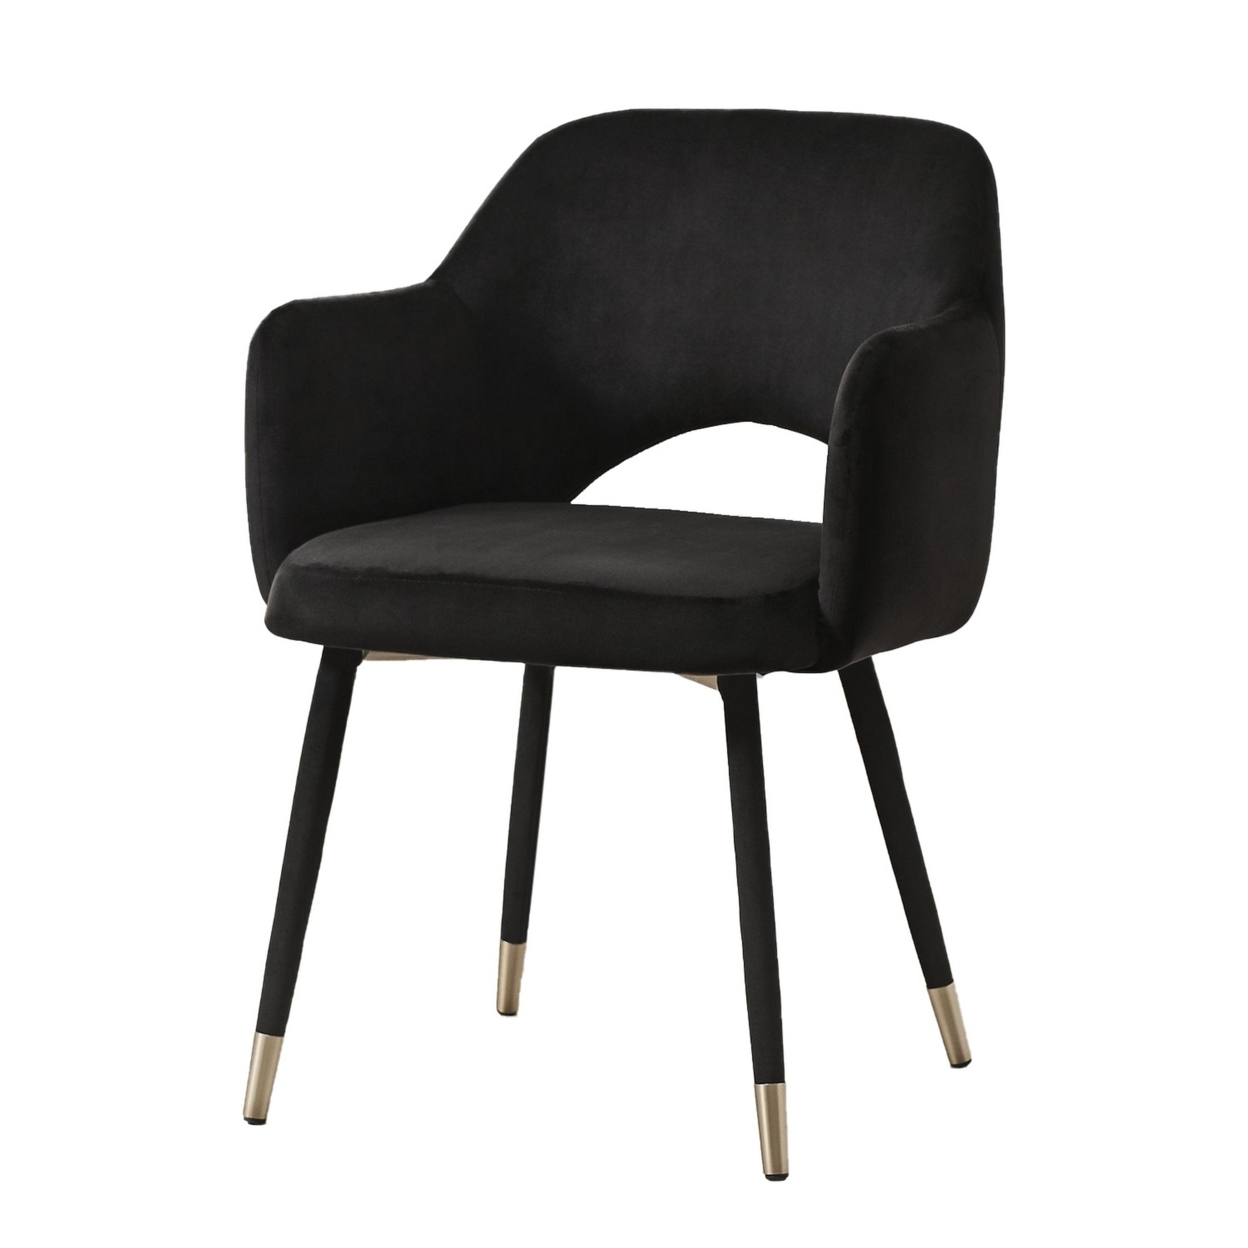 Velvet Padded Accent Chair With Open Back And Angled Legs, Black And Gold- Saltoro Sherpi